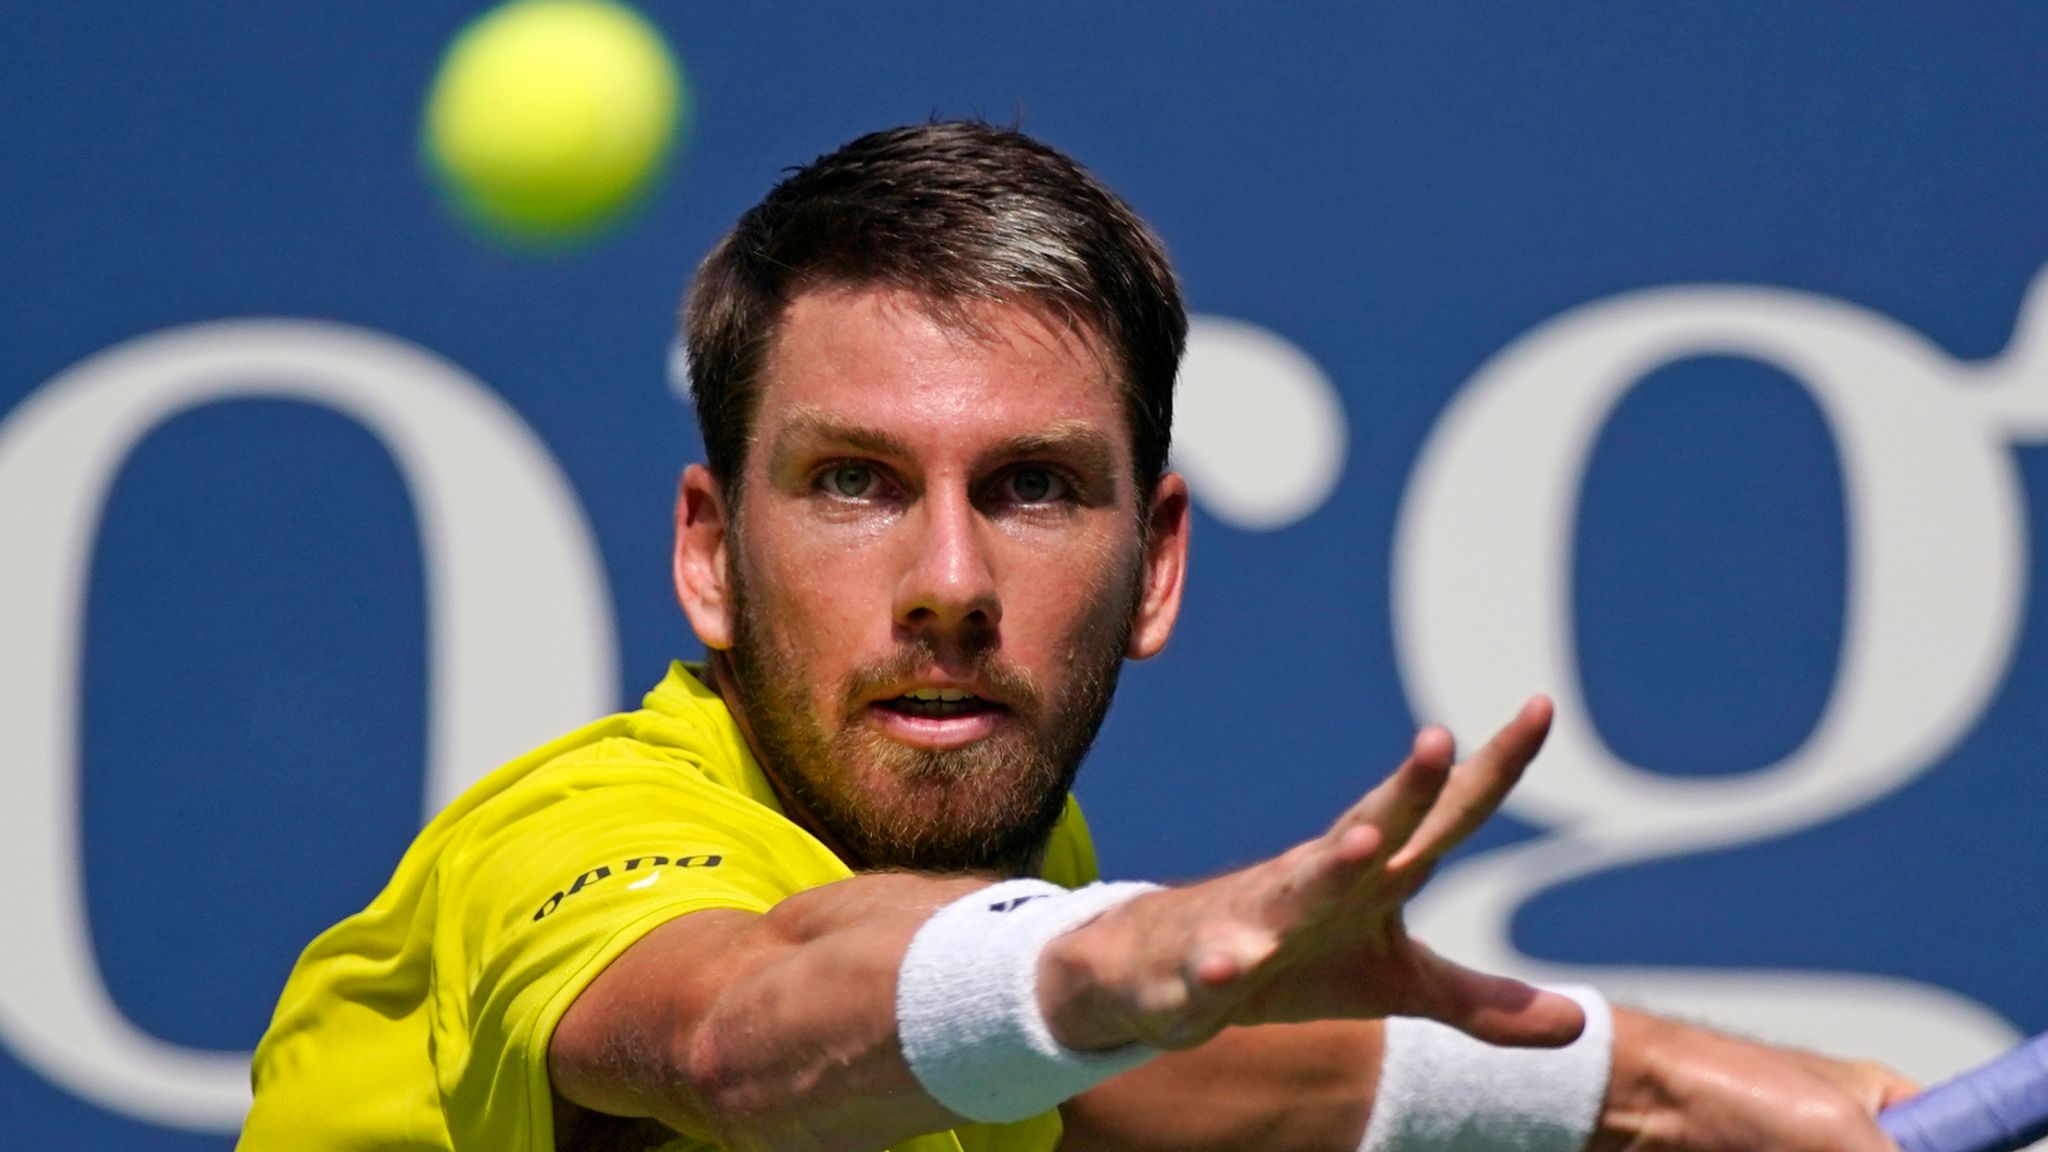 US Open Cameron Norrie loses to Andrey Rublev in straight sets in last 16 Tennis News Sky Sports